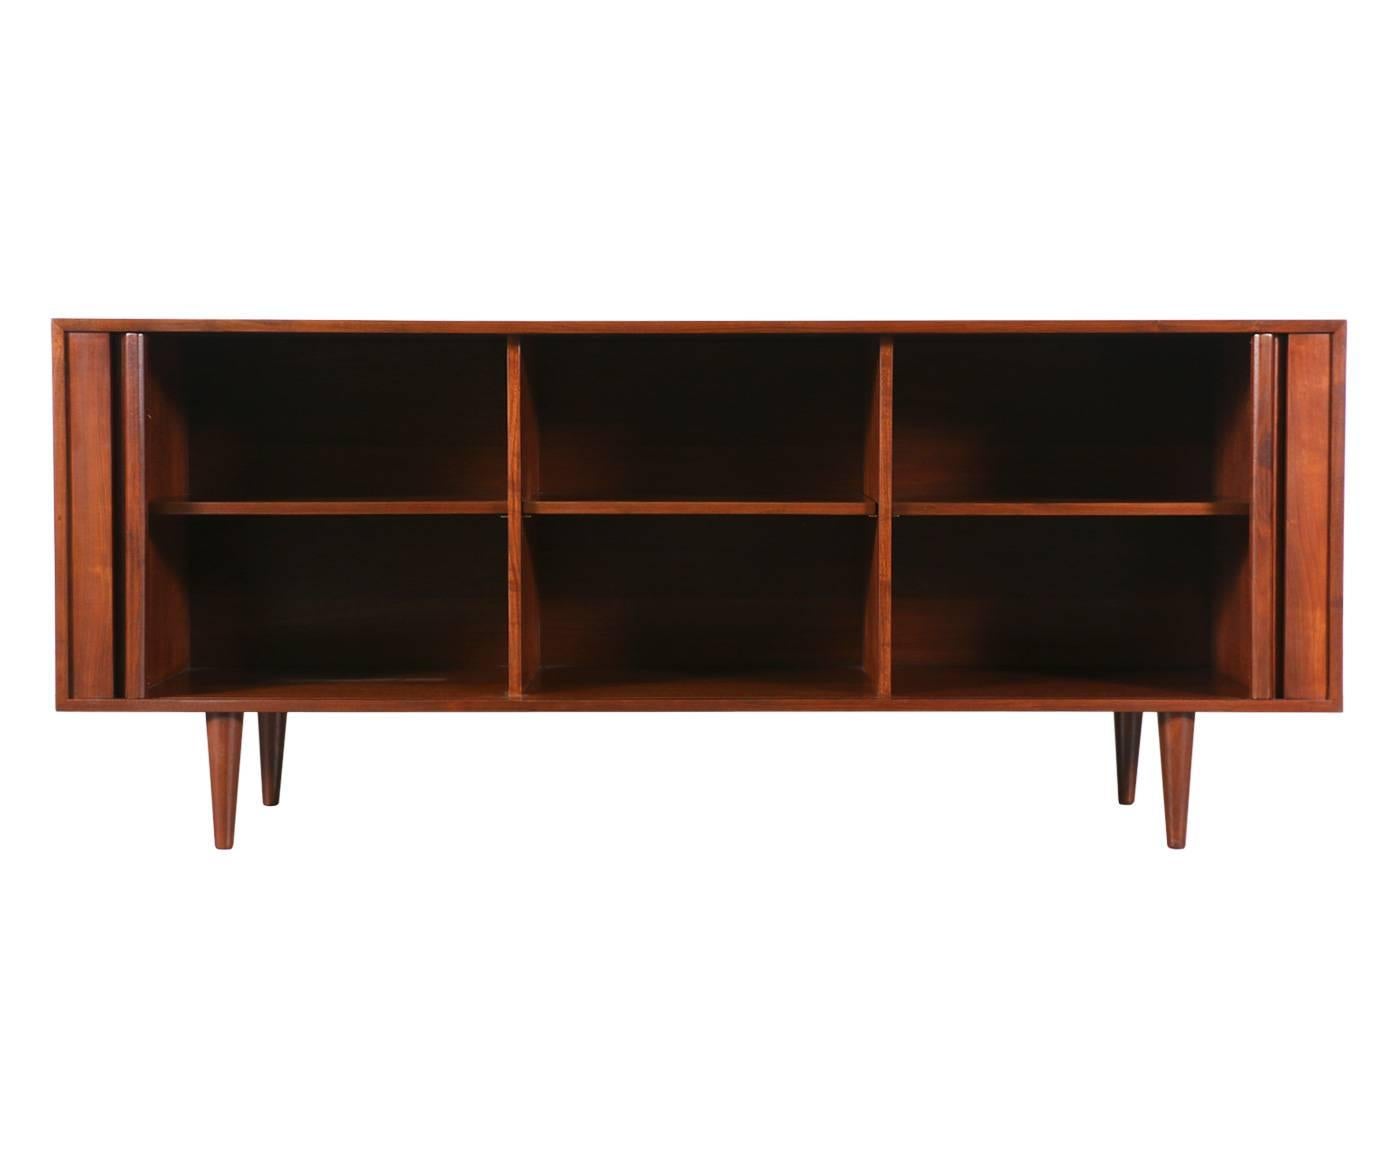 Designer: Unknown
Manufacturer: Unknown
Period/Style: Mid Century Modern
Country: United States
Date: 1960s

Dimensions: 30″H x 72″L x 18″W
Materials: Walnut
Condition: Excellent – Newly Refinished
Number of Items: 1
ID Number: 4288